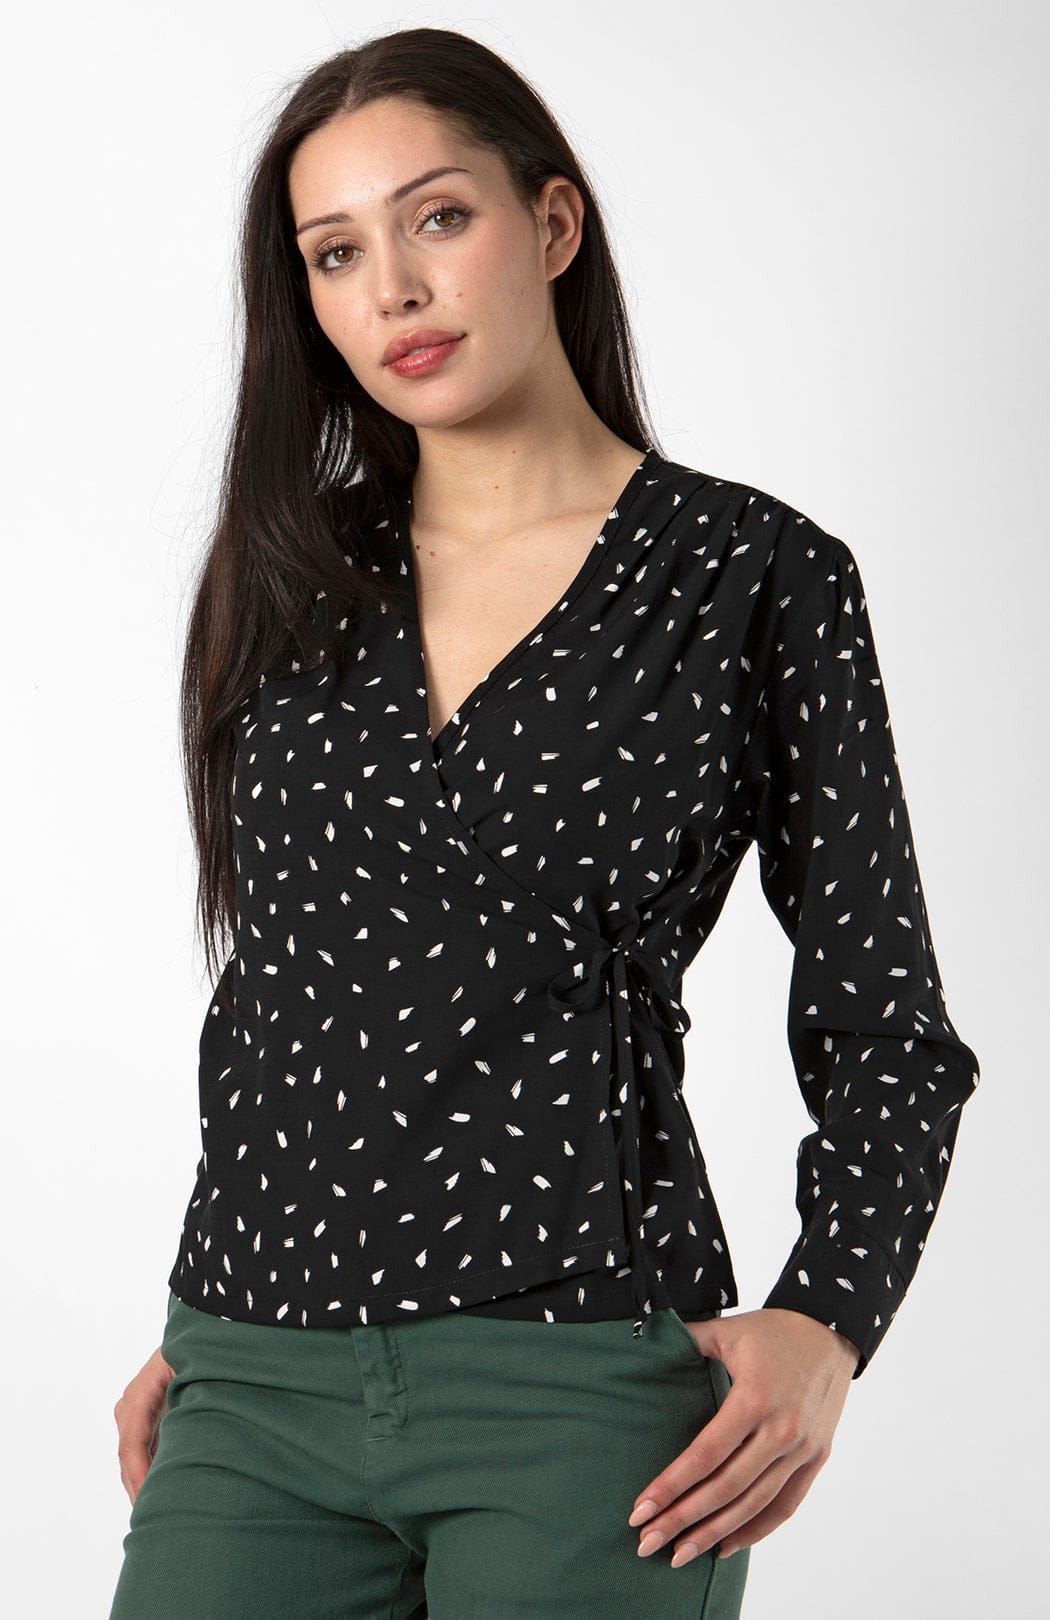 Wrap Blouse - Cameo Clothing Line